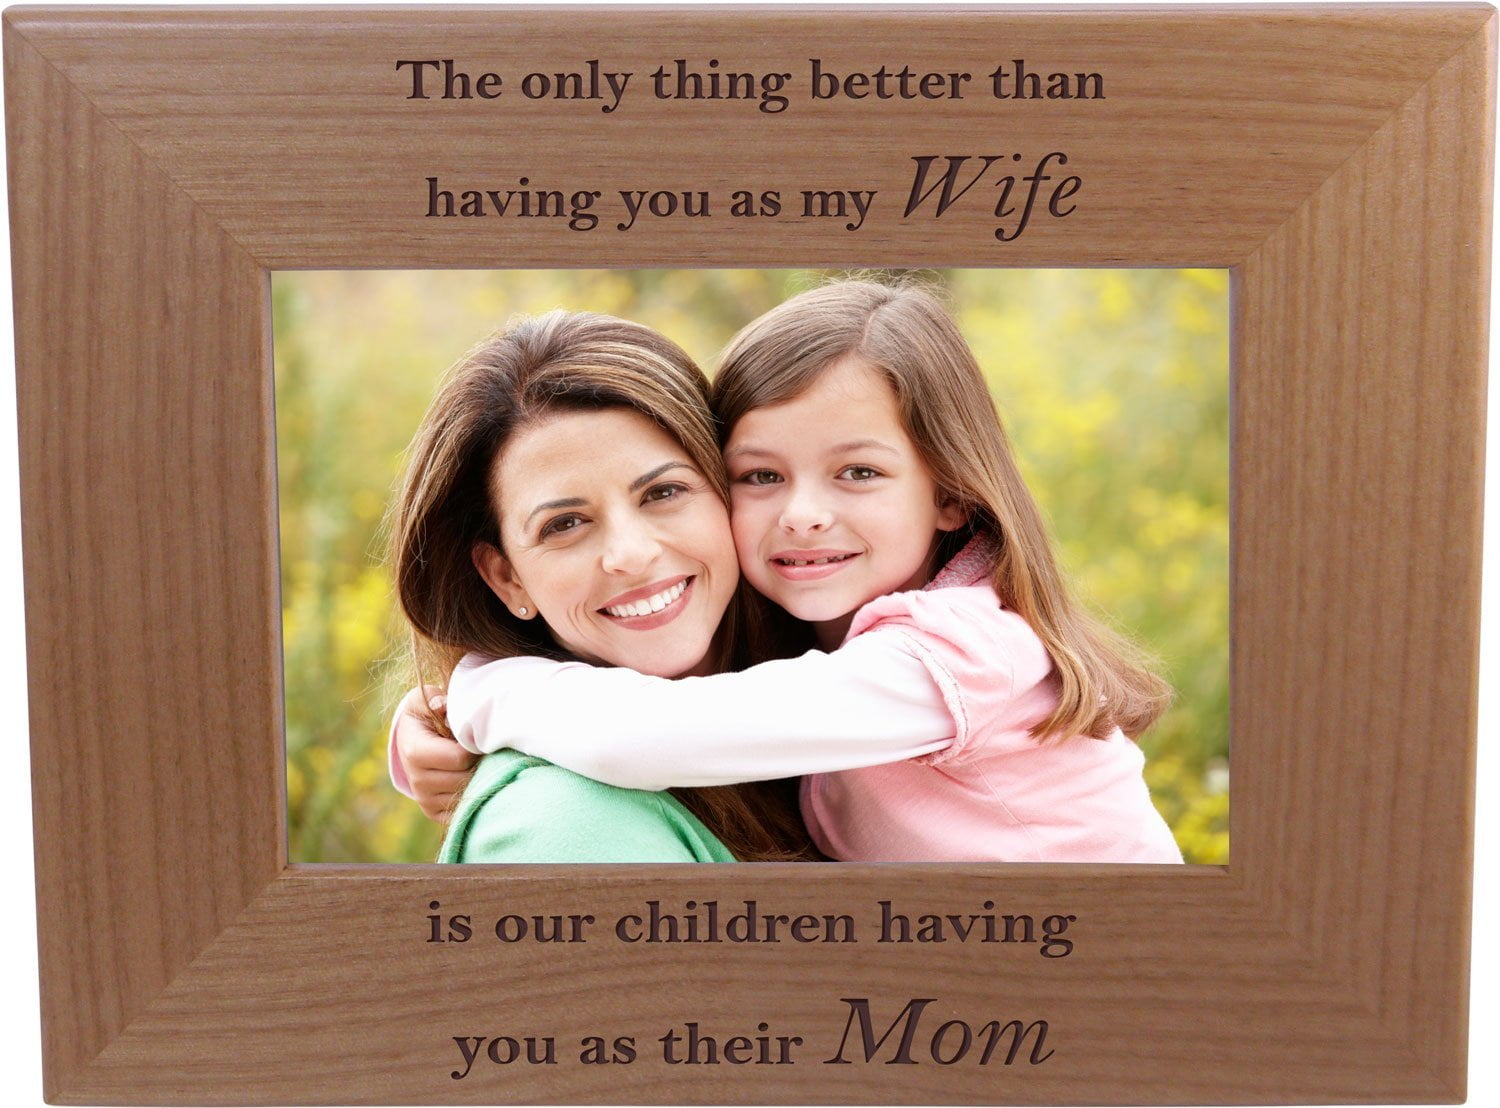 The only thing better than having you as my wife is our children having ...